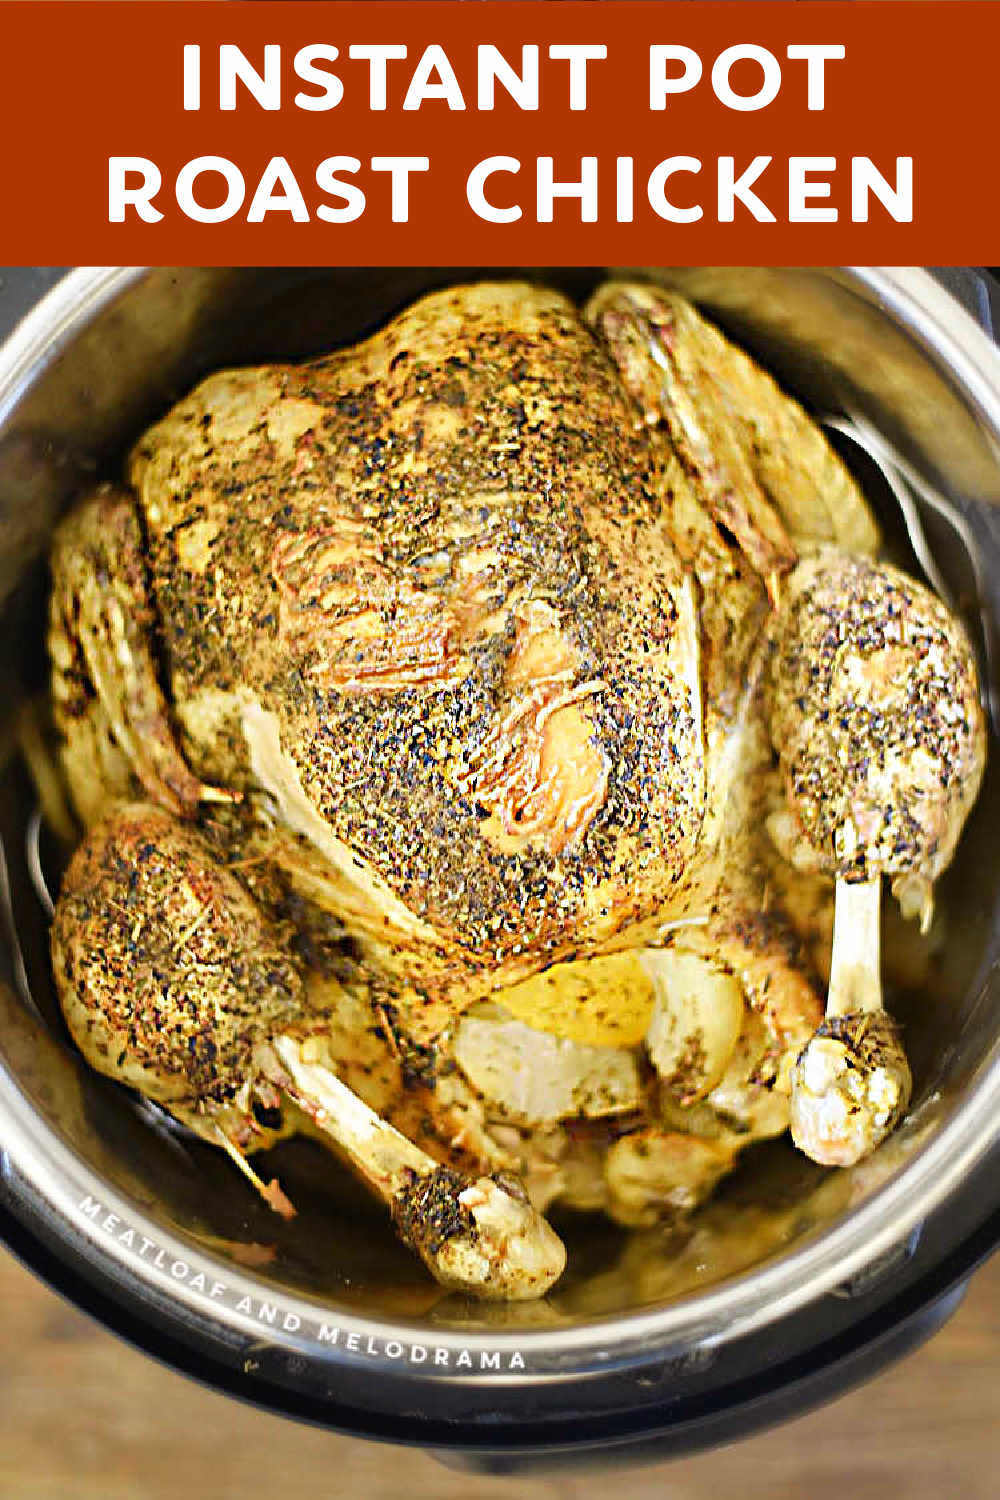 This Instant Pot Whole Roast Chicken recipe shows how to cook a whole chicken in the pressure cooker. Use Duo Crisp or broil for crispy skin after pressure cooking. Your whole family will love this easy chicken recipe, and it's so much faster than roasting a chicken in the oven! via @meamel